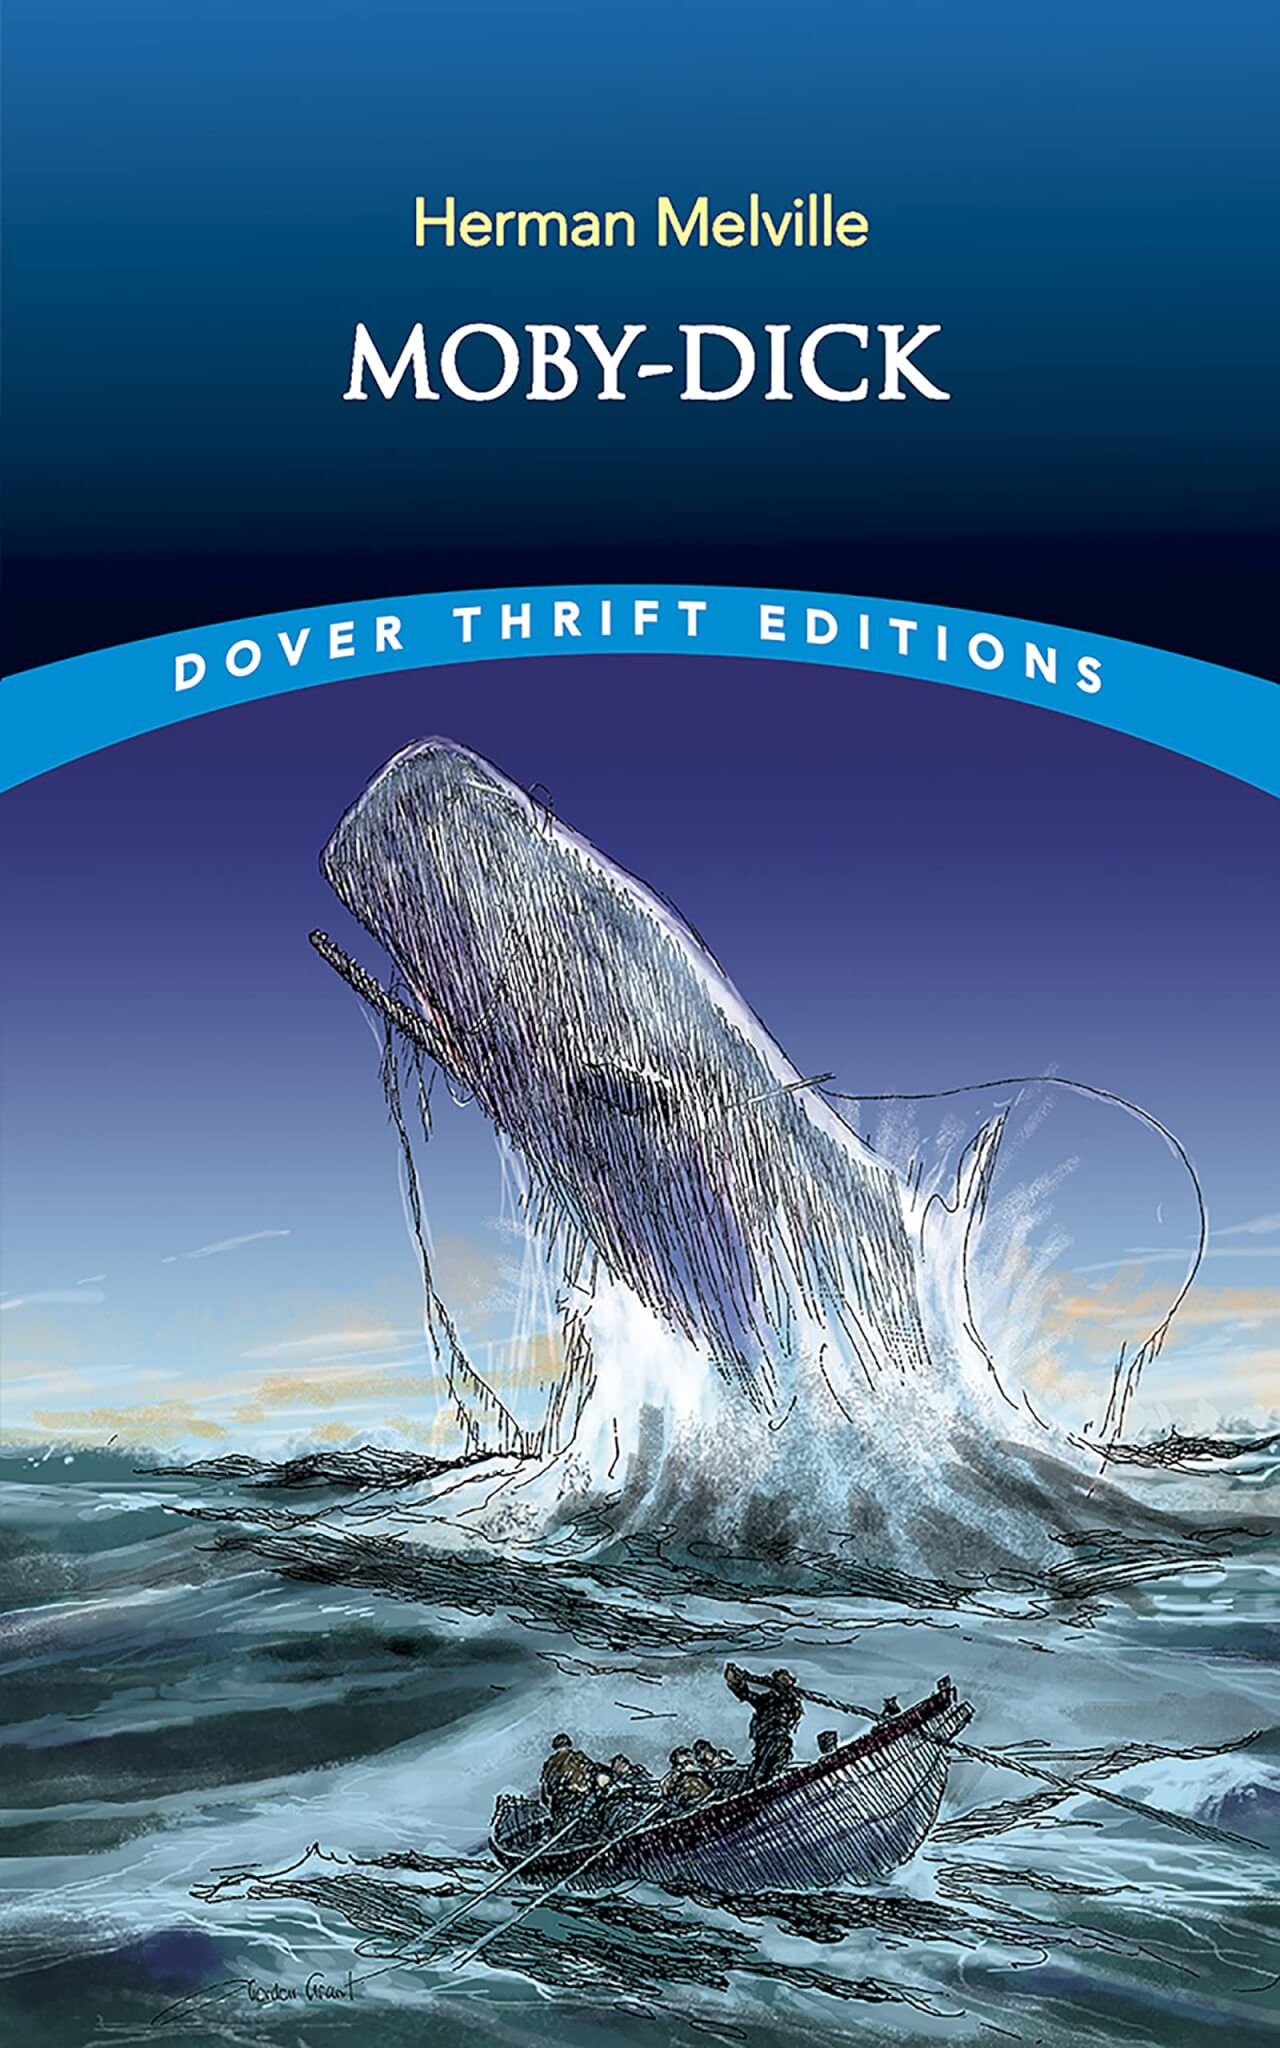 "Moby Dick" 